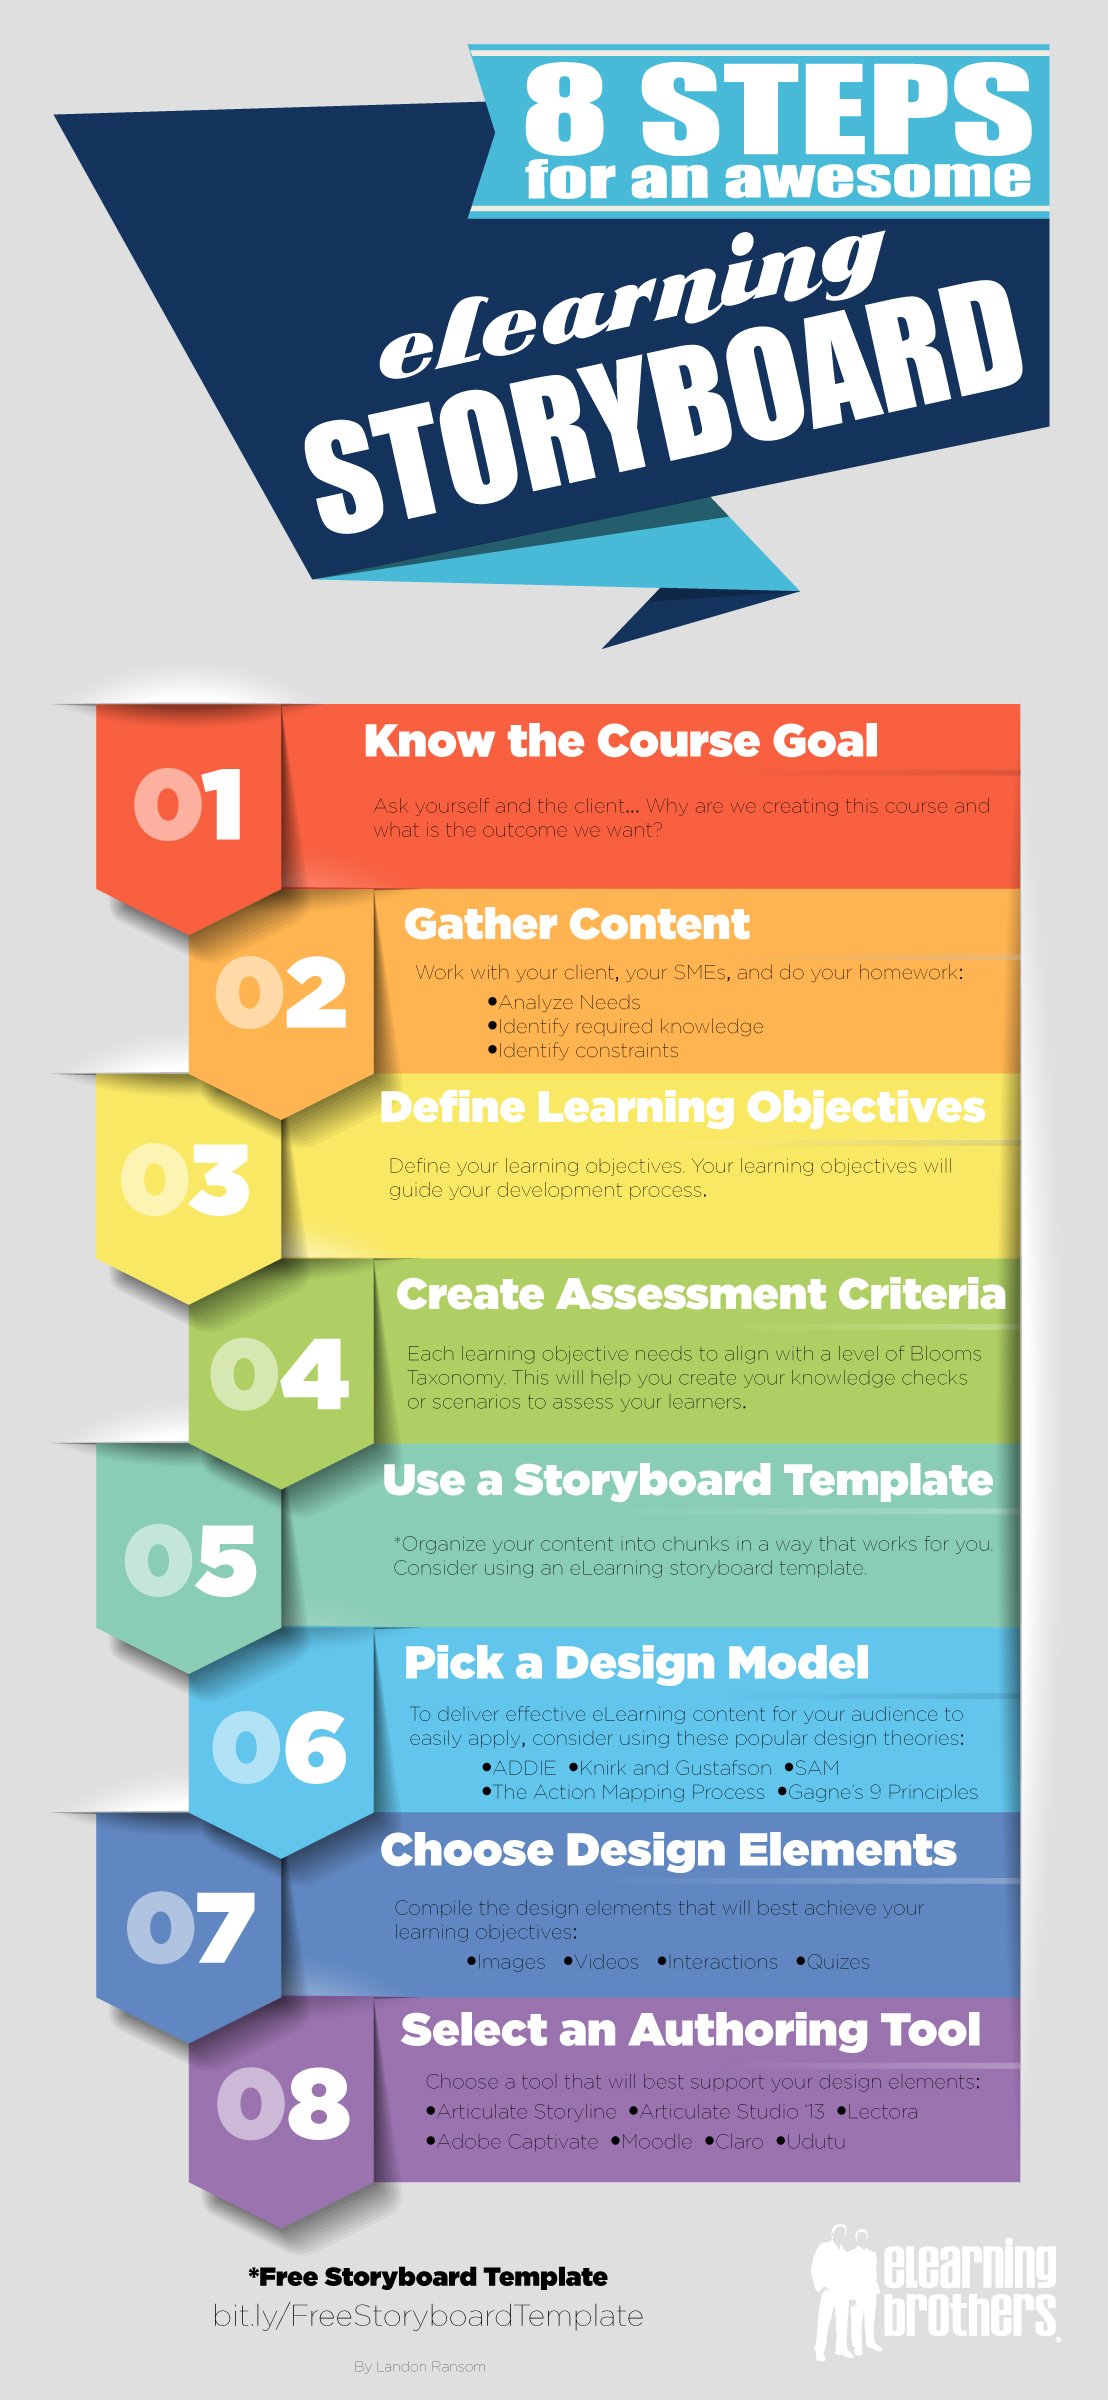 8-steps-for-an-awesome-elearning-storyboard